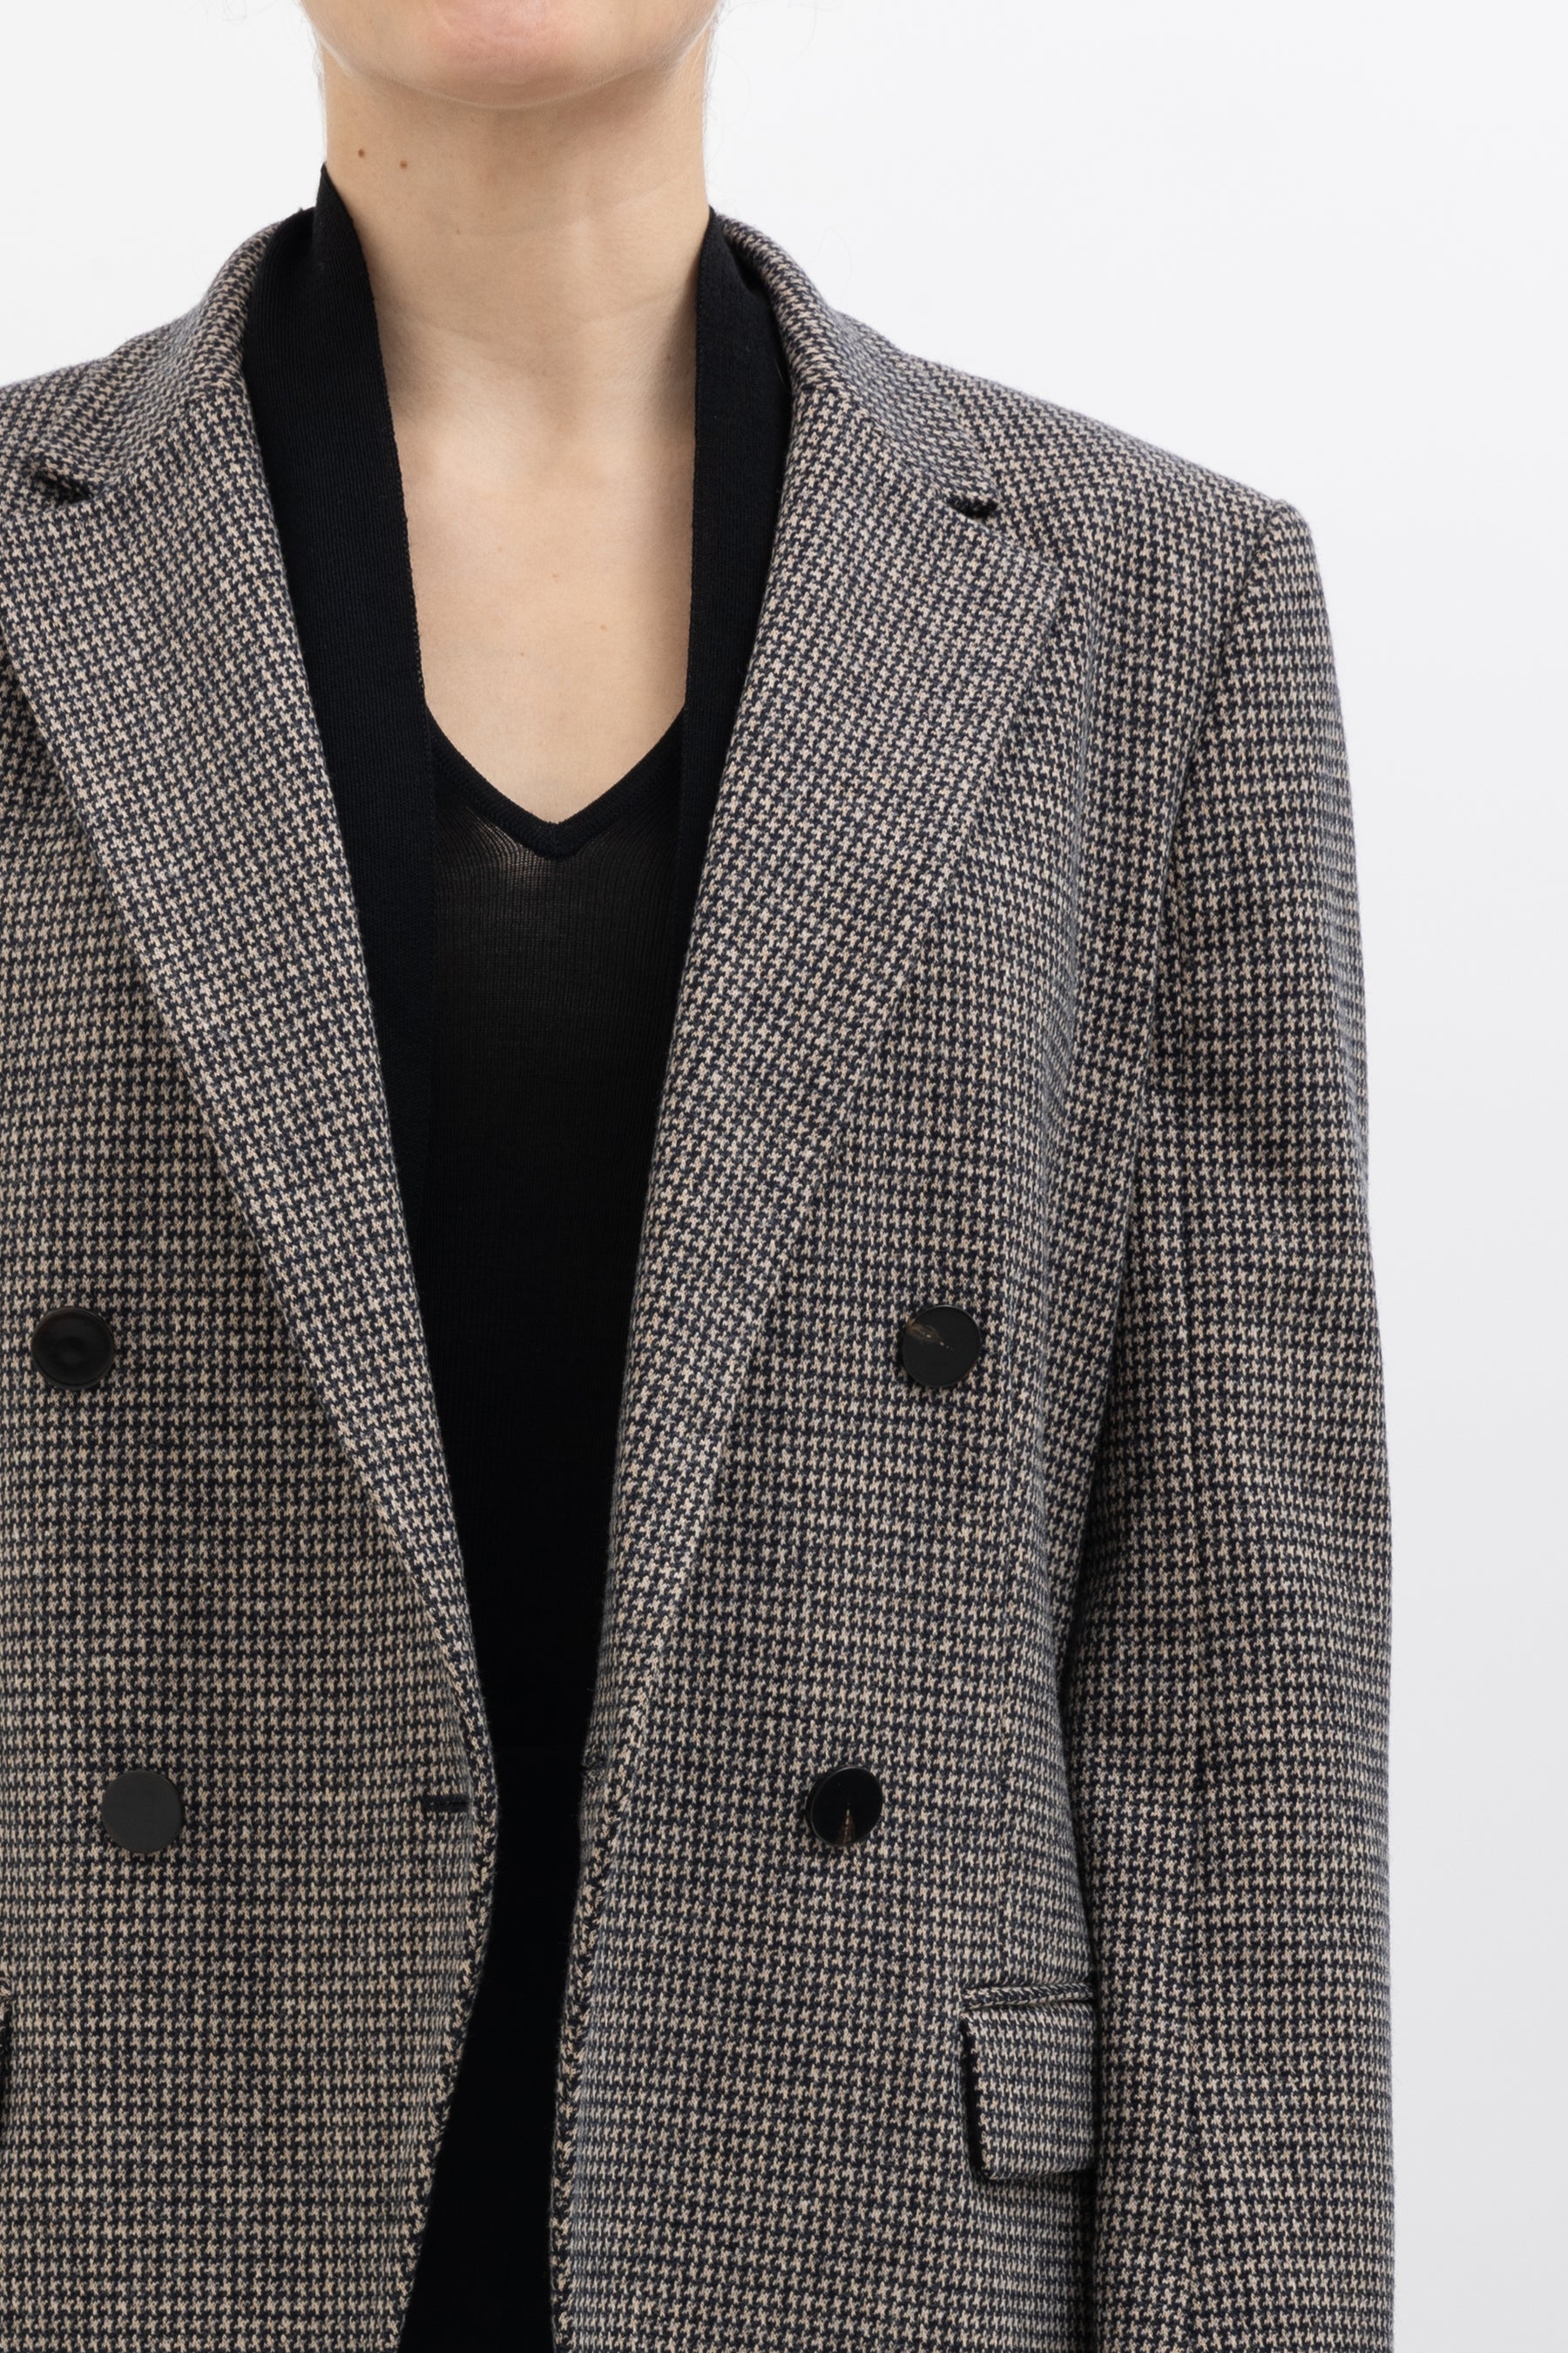 Angled Double-Breasted Blazer